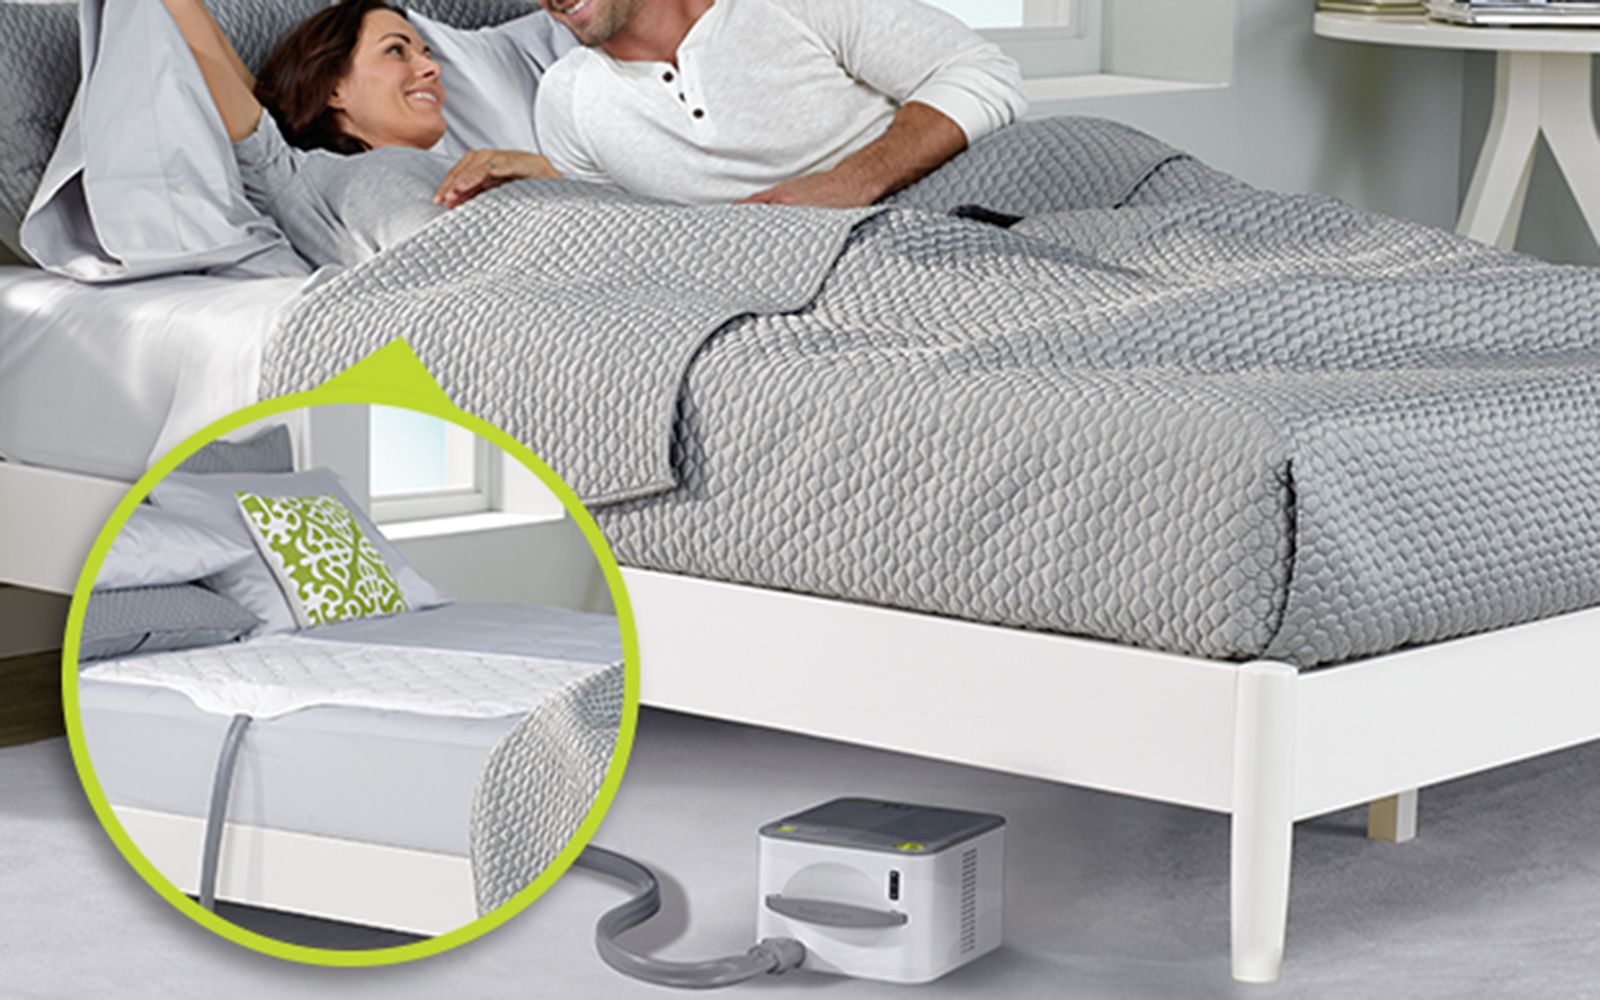 nuyu sleep system heats and cool with your body for the perfect night s kip image 1